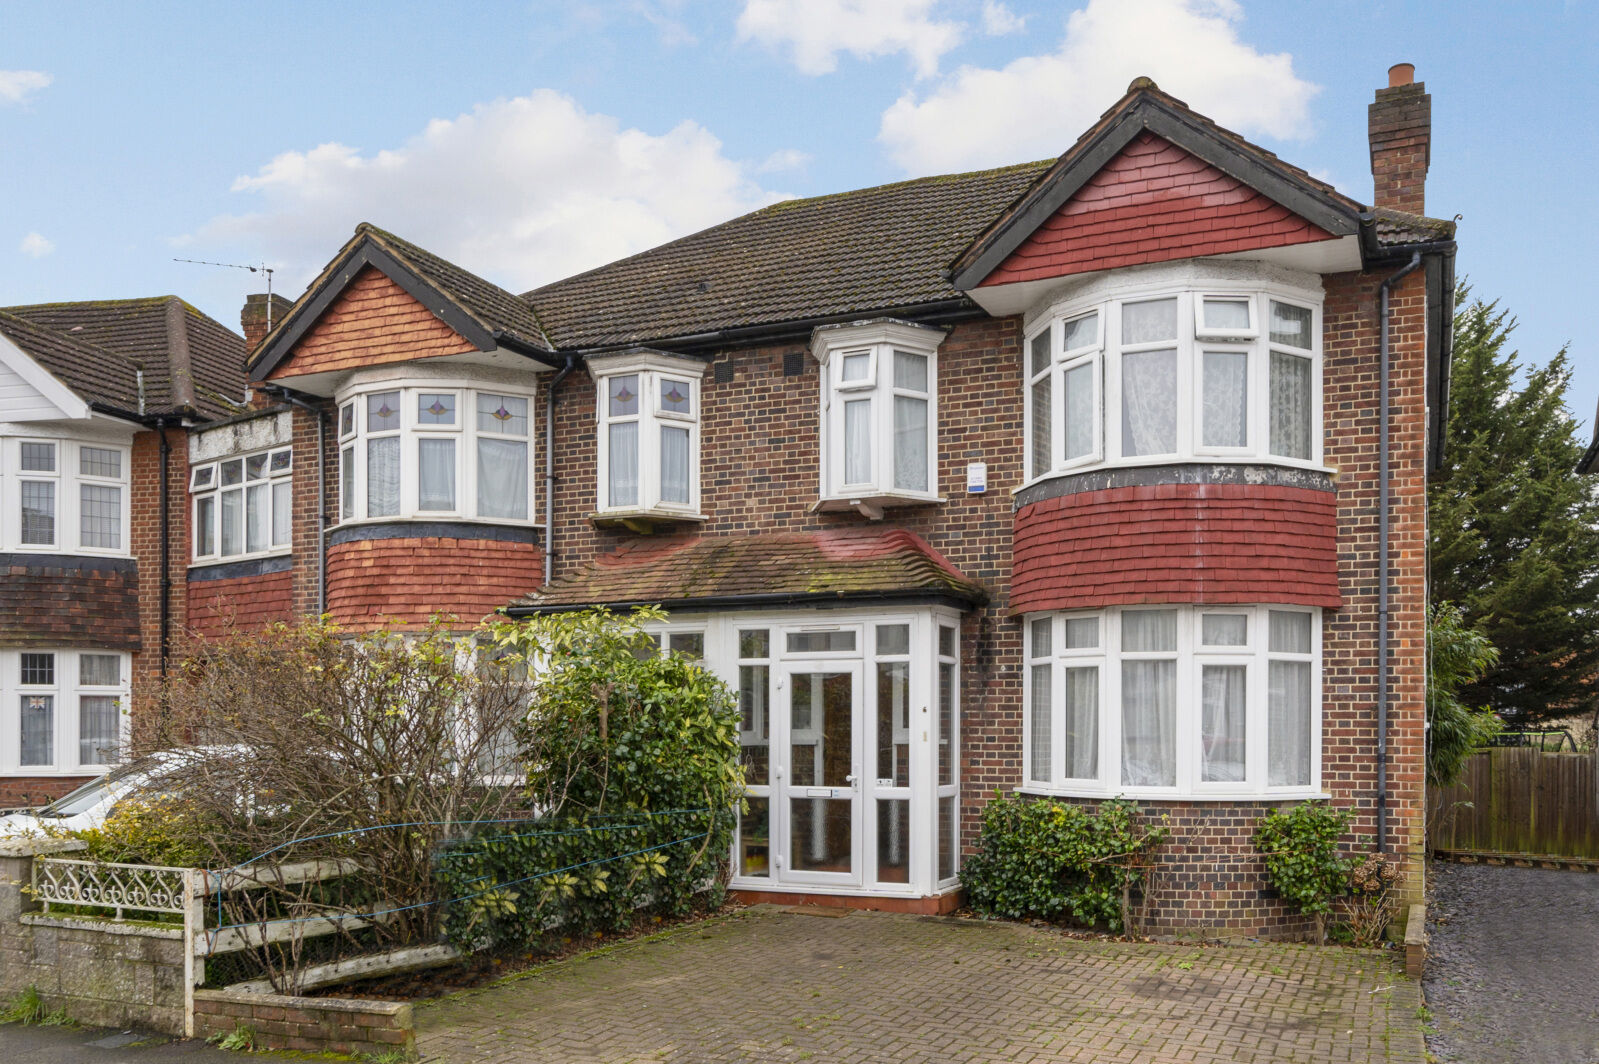 3 bedroom semi detached house for sale Southway, Raynes Park, SW20, main image